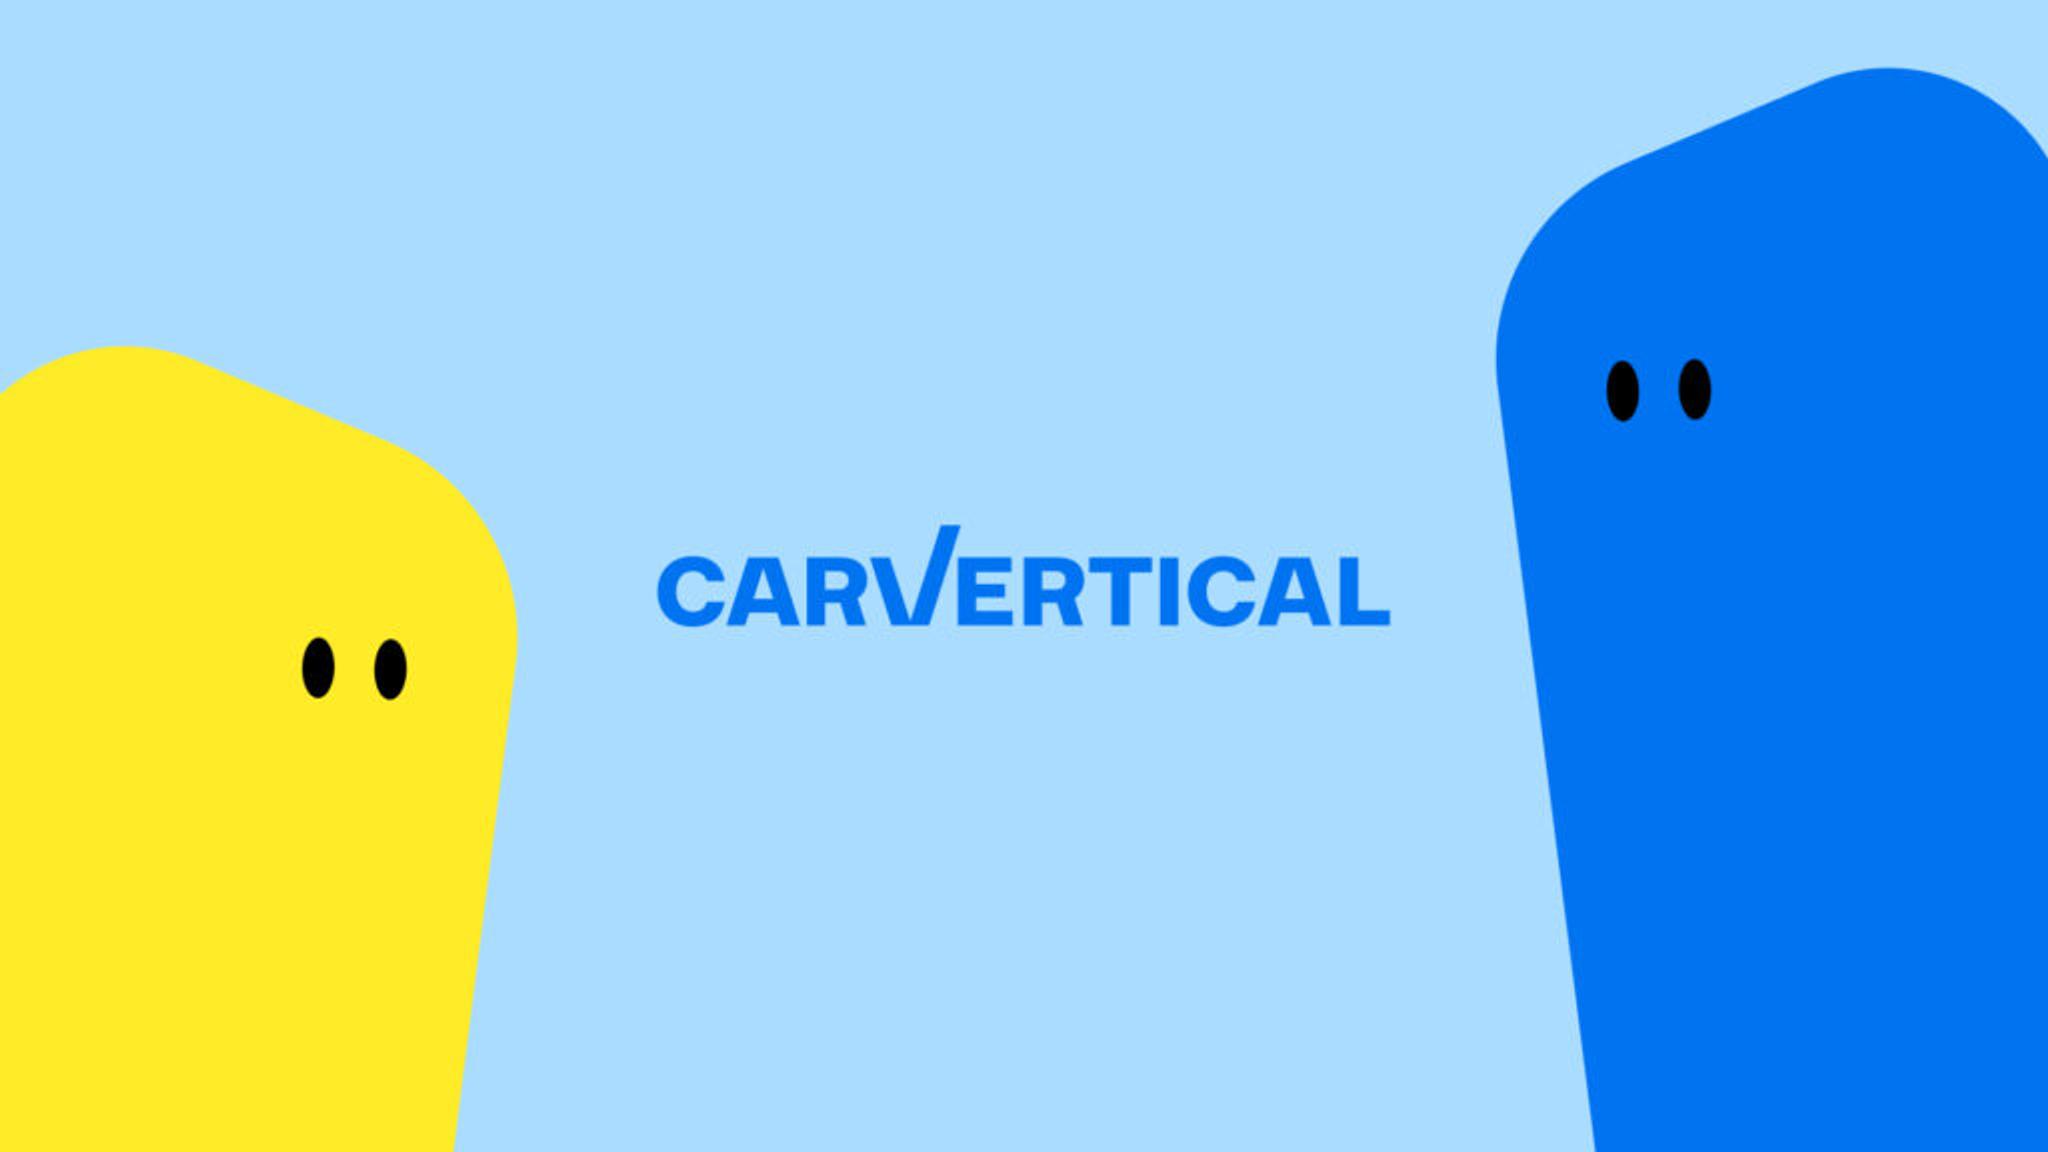 Mascots carvertical with a logo